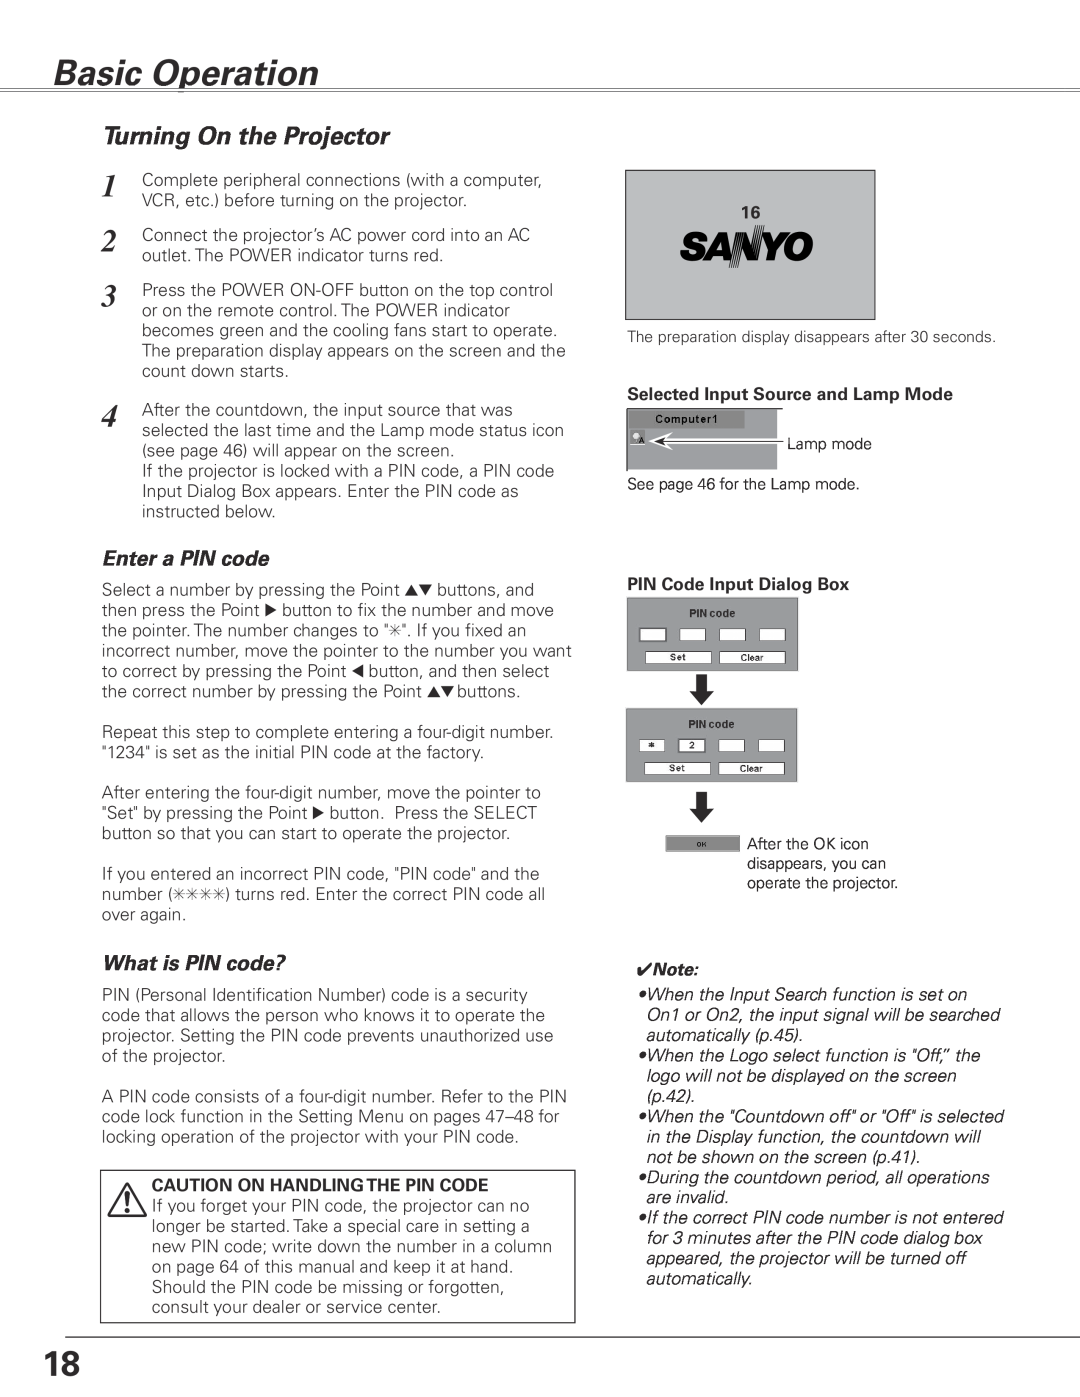 Sanyo PLC-XL45 Basic Operation, Turning On the Projector, Enter a PIN code, What is PIN code?, PIN Code Input Dialog Box 